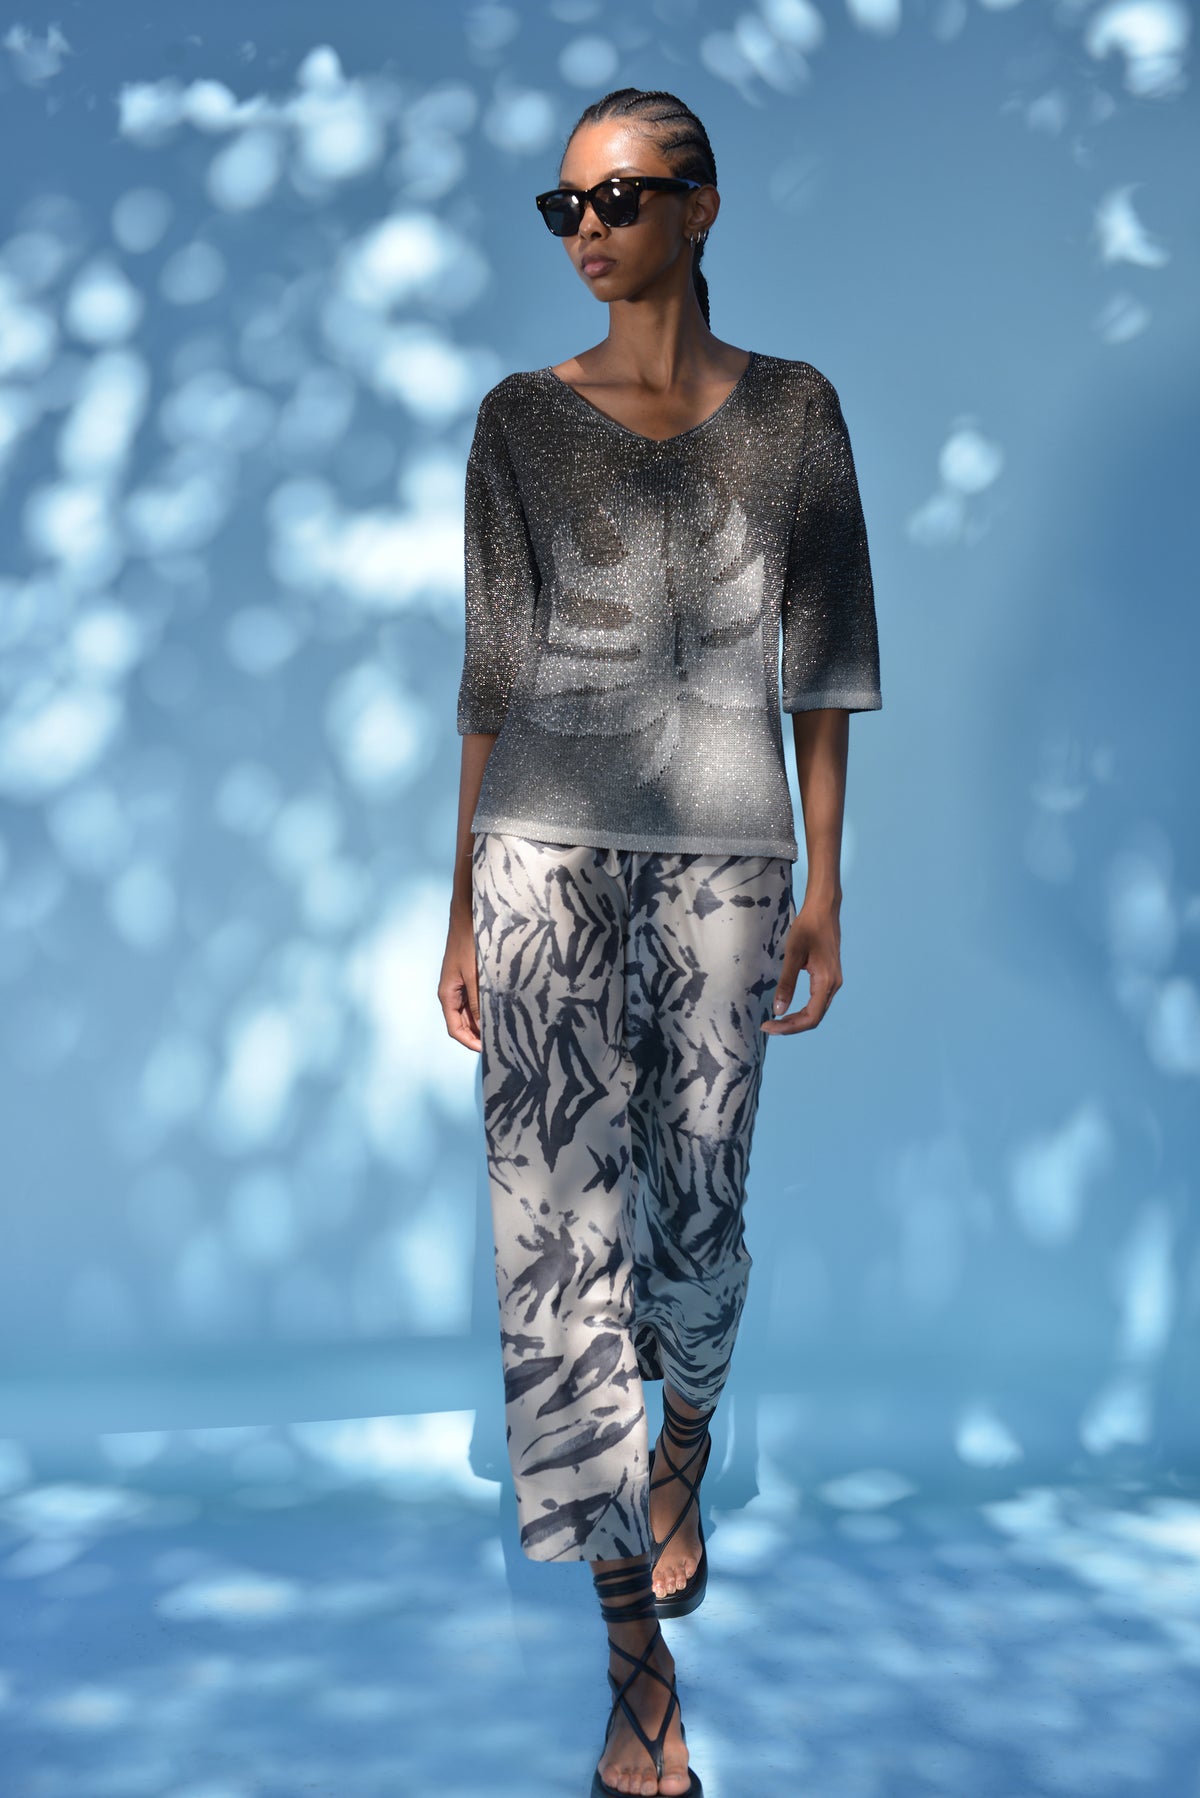 hand-painted sweater 4346.954.022
printed trousers 6676.272.114